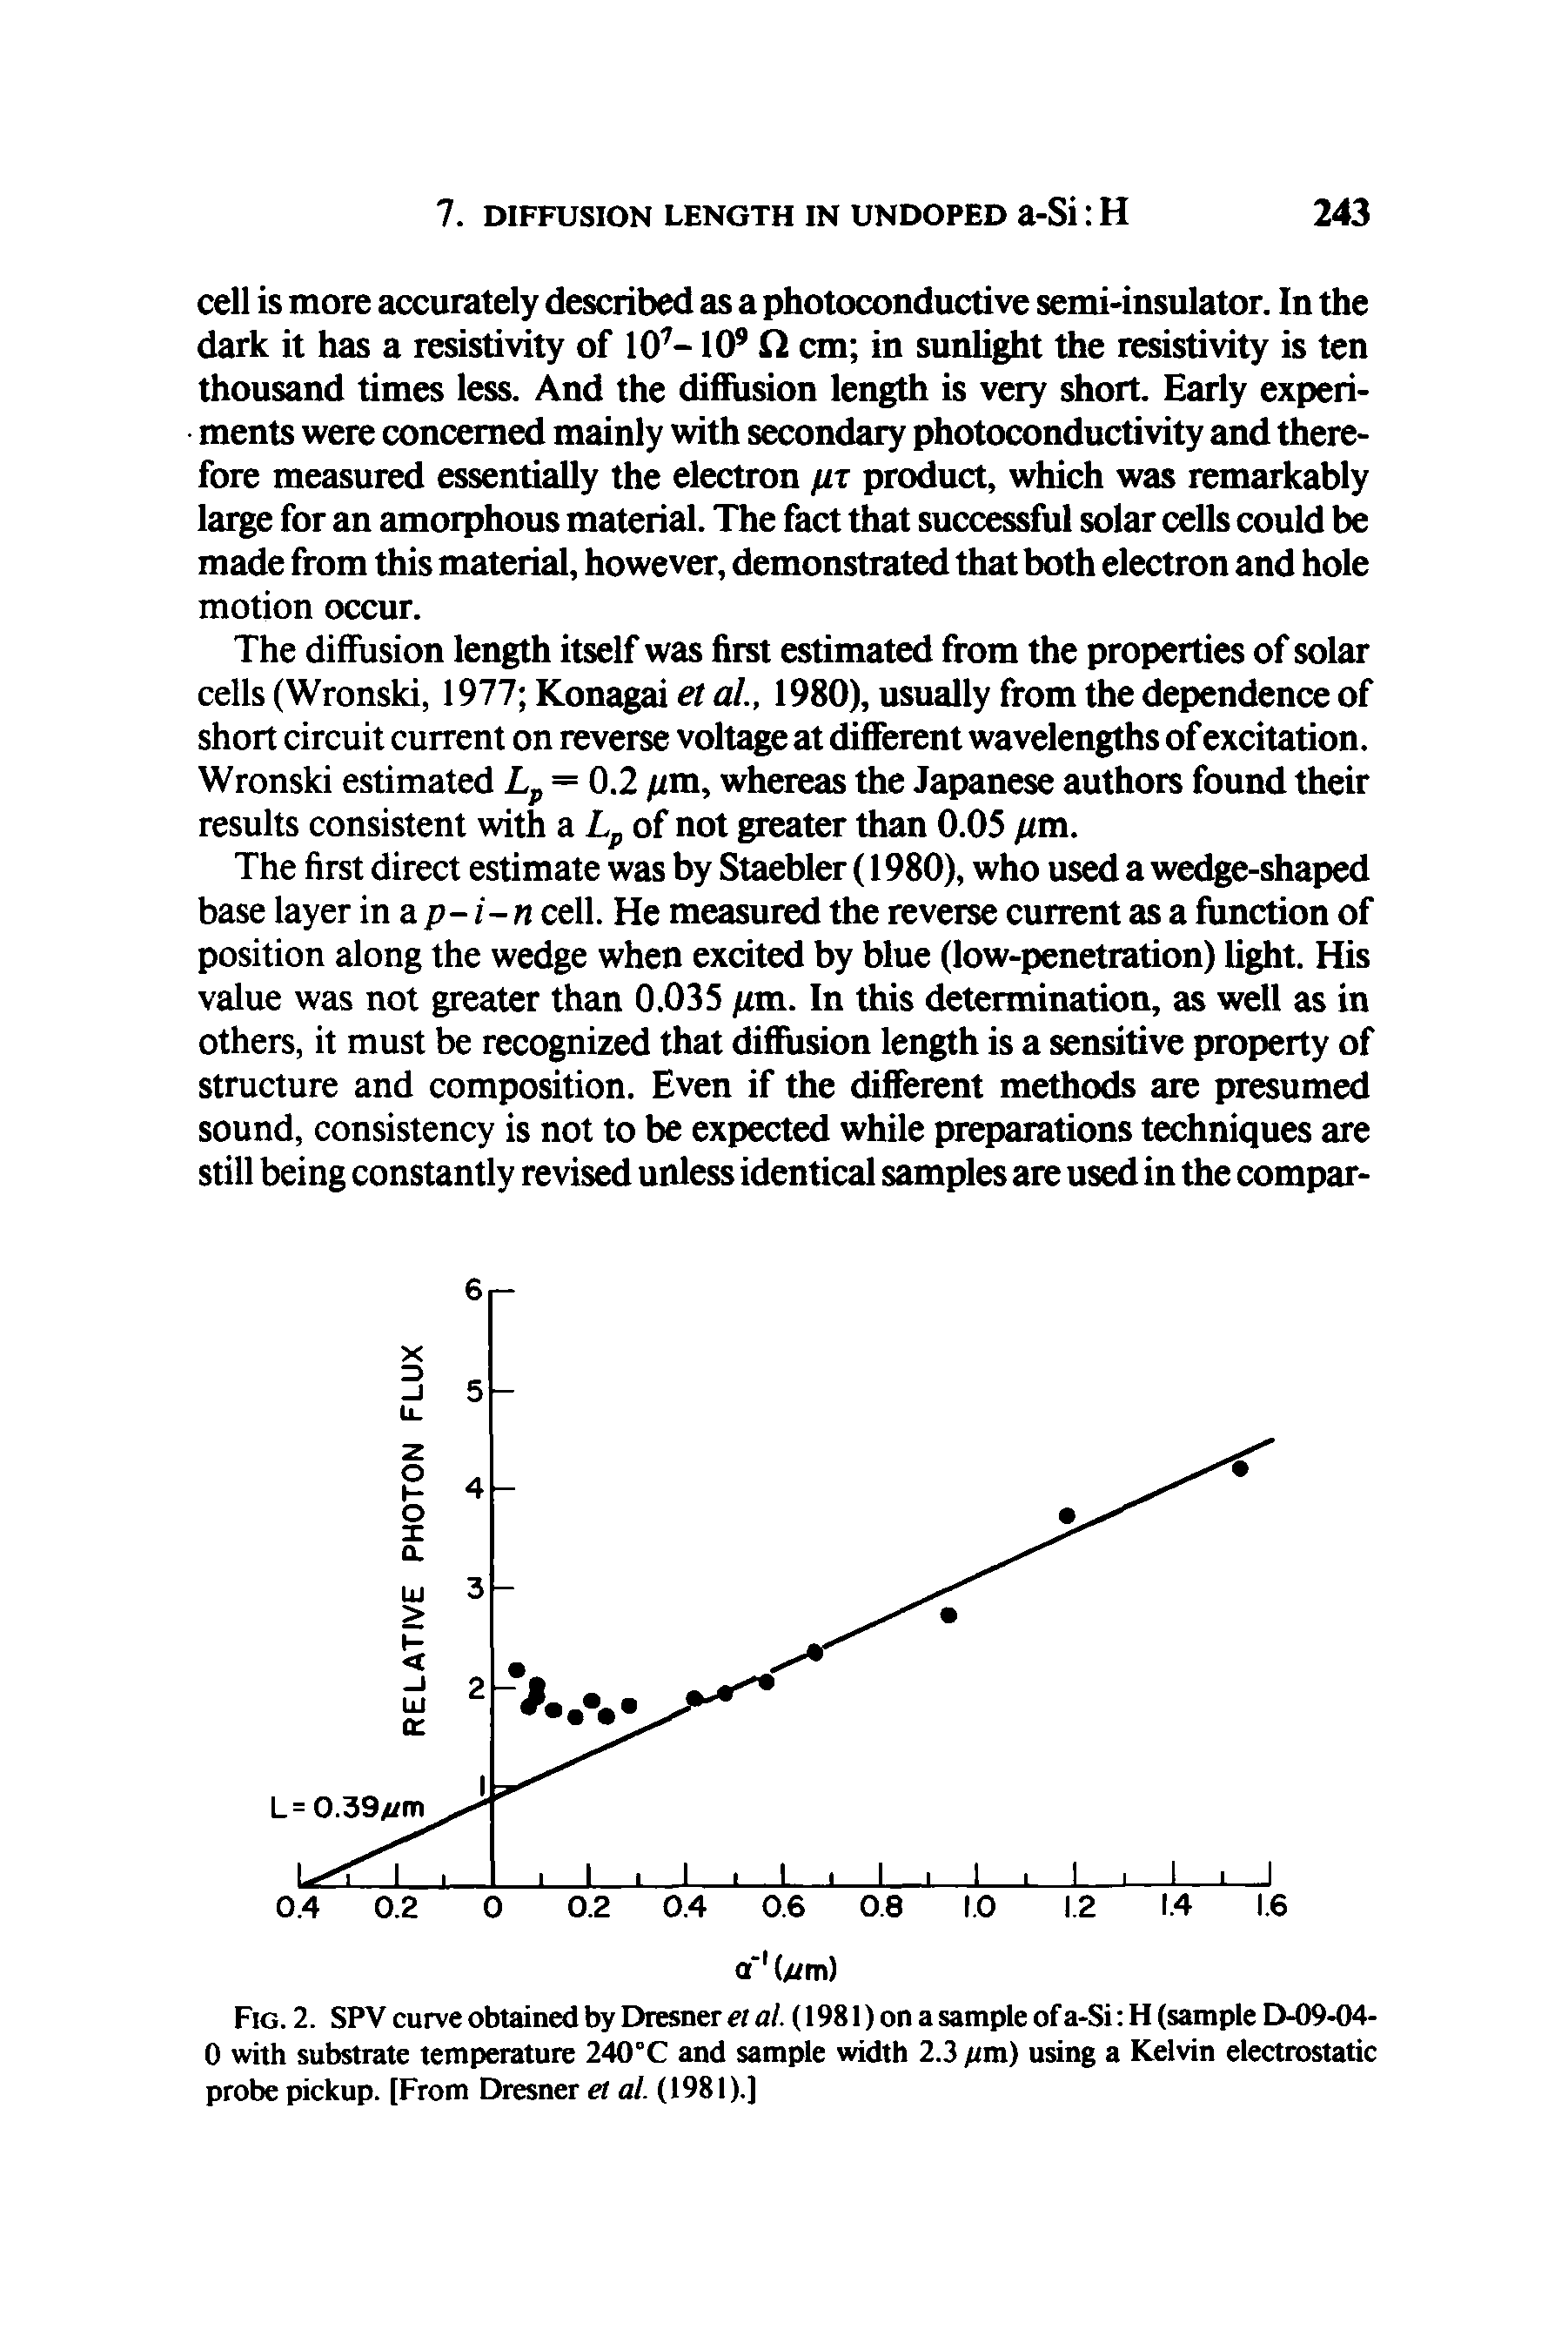 Fig. 2. SPV curve obtained by Dresner et a/. (1981) on a sample of a-Si H (sample D-09-04-0 with substrate temperature 240°C and sample width 2.3 fim) using a Kelvin electrostatic probe pickup. [From Dresner et al. (1981).]...